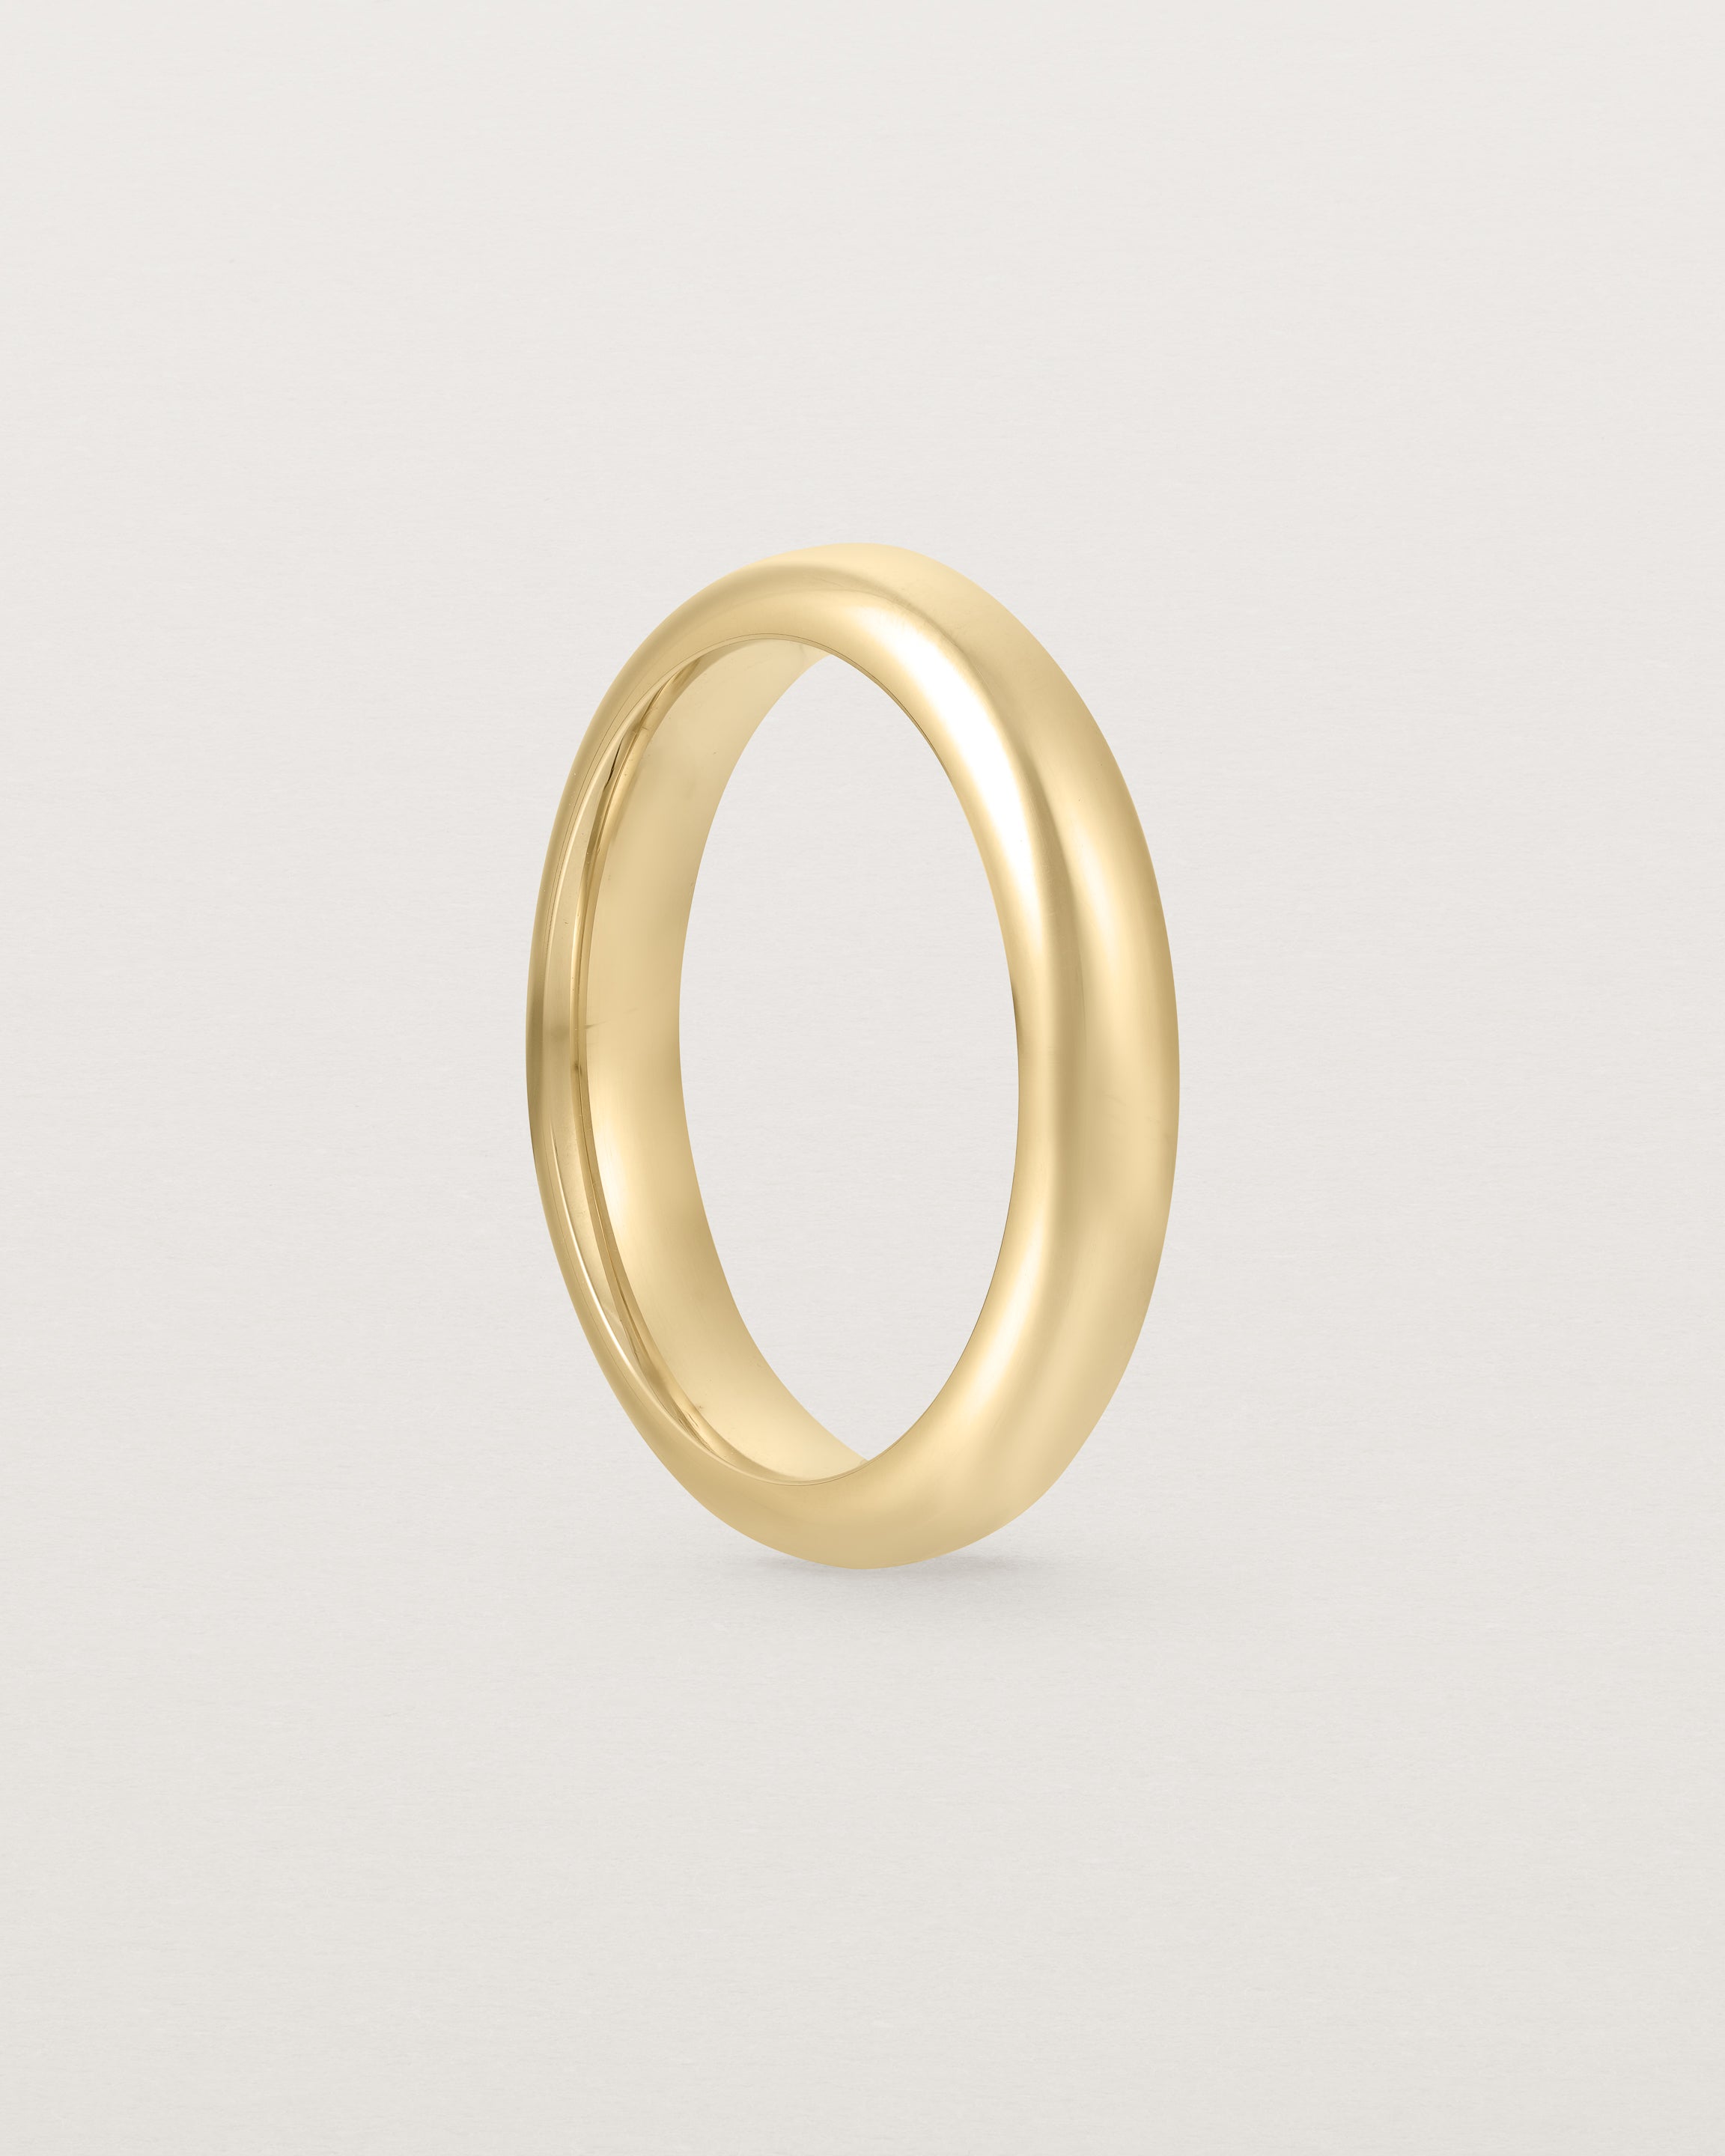 Standing view of the Bold Curve Ring | 4mm | Yellow Gold.